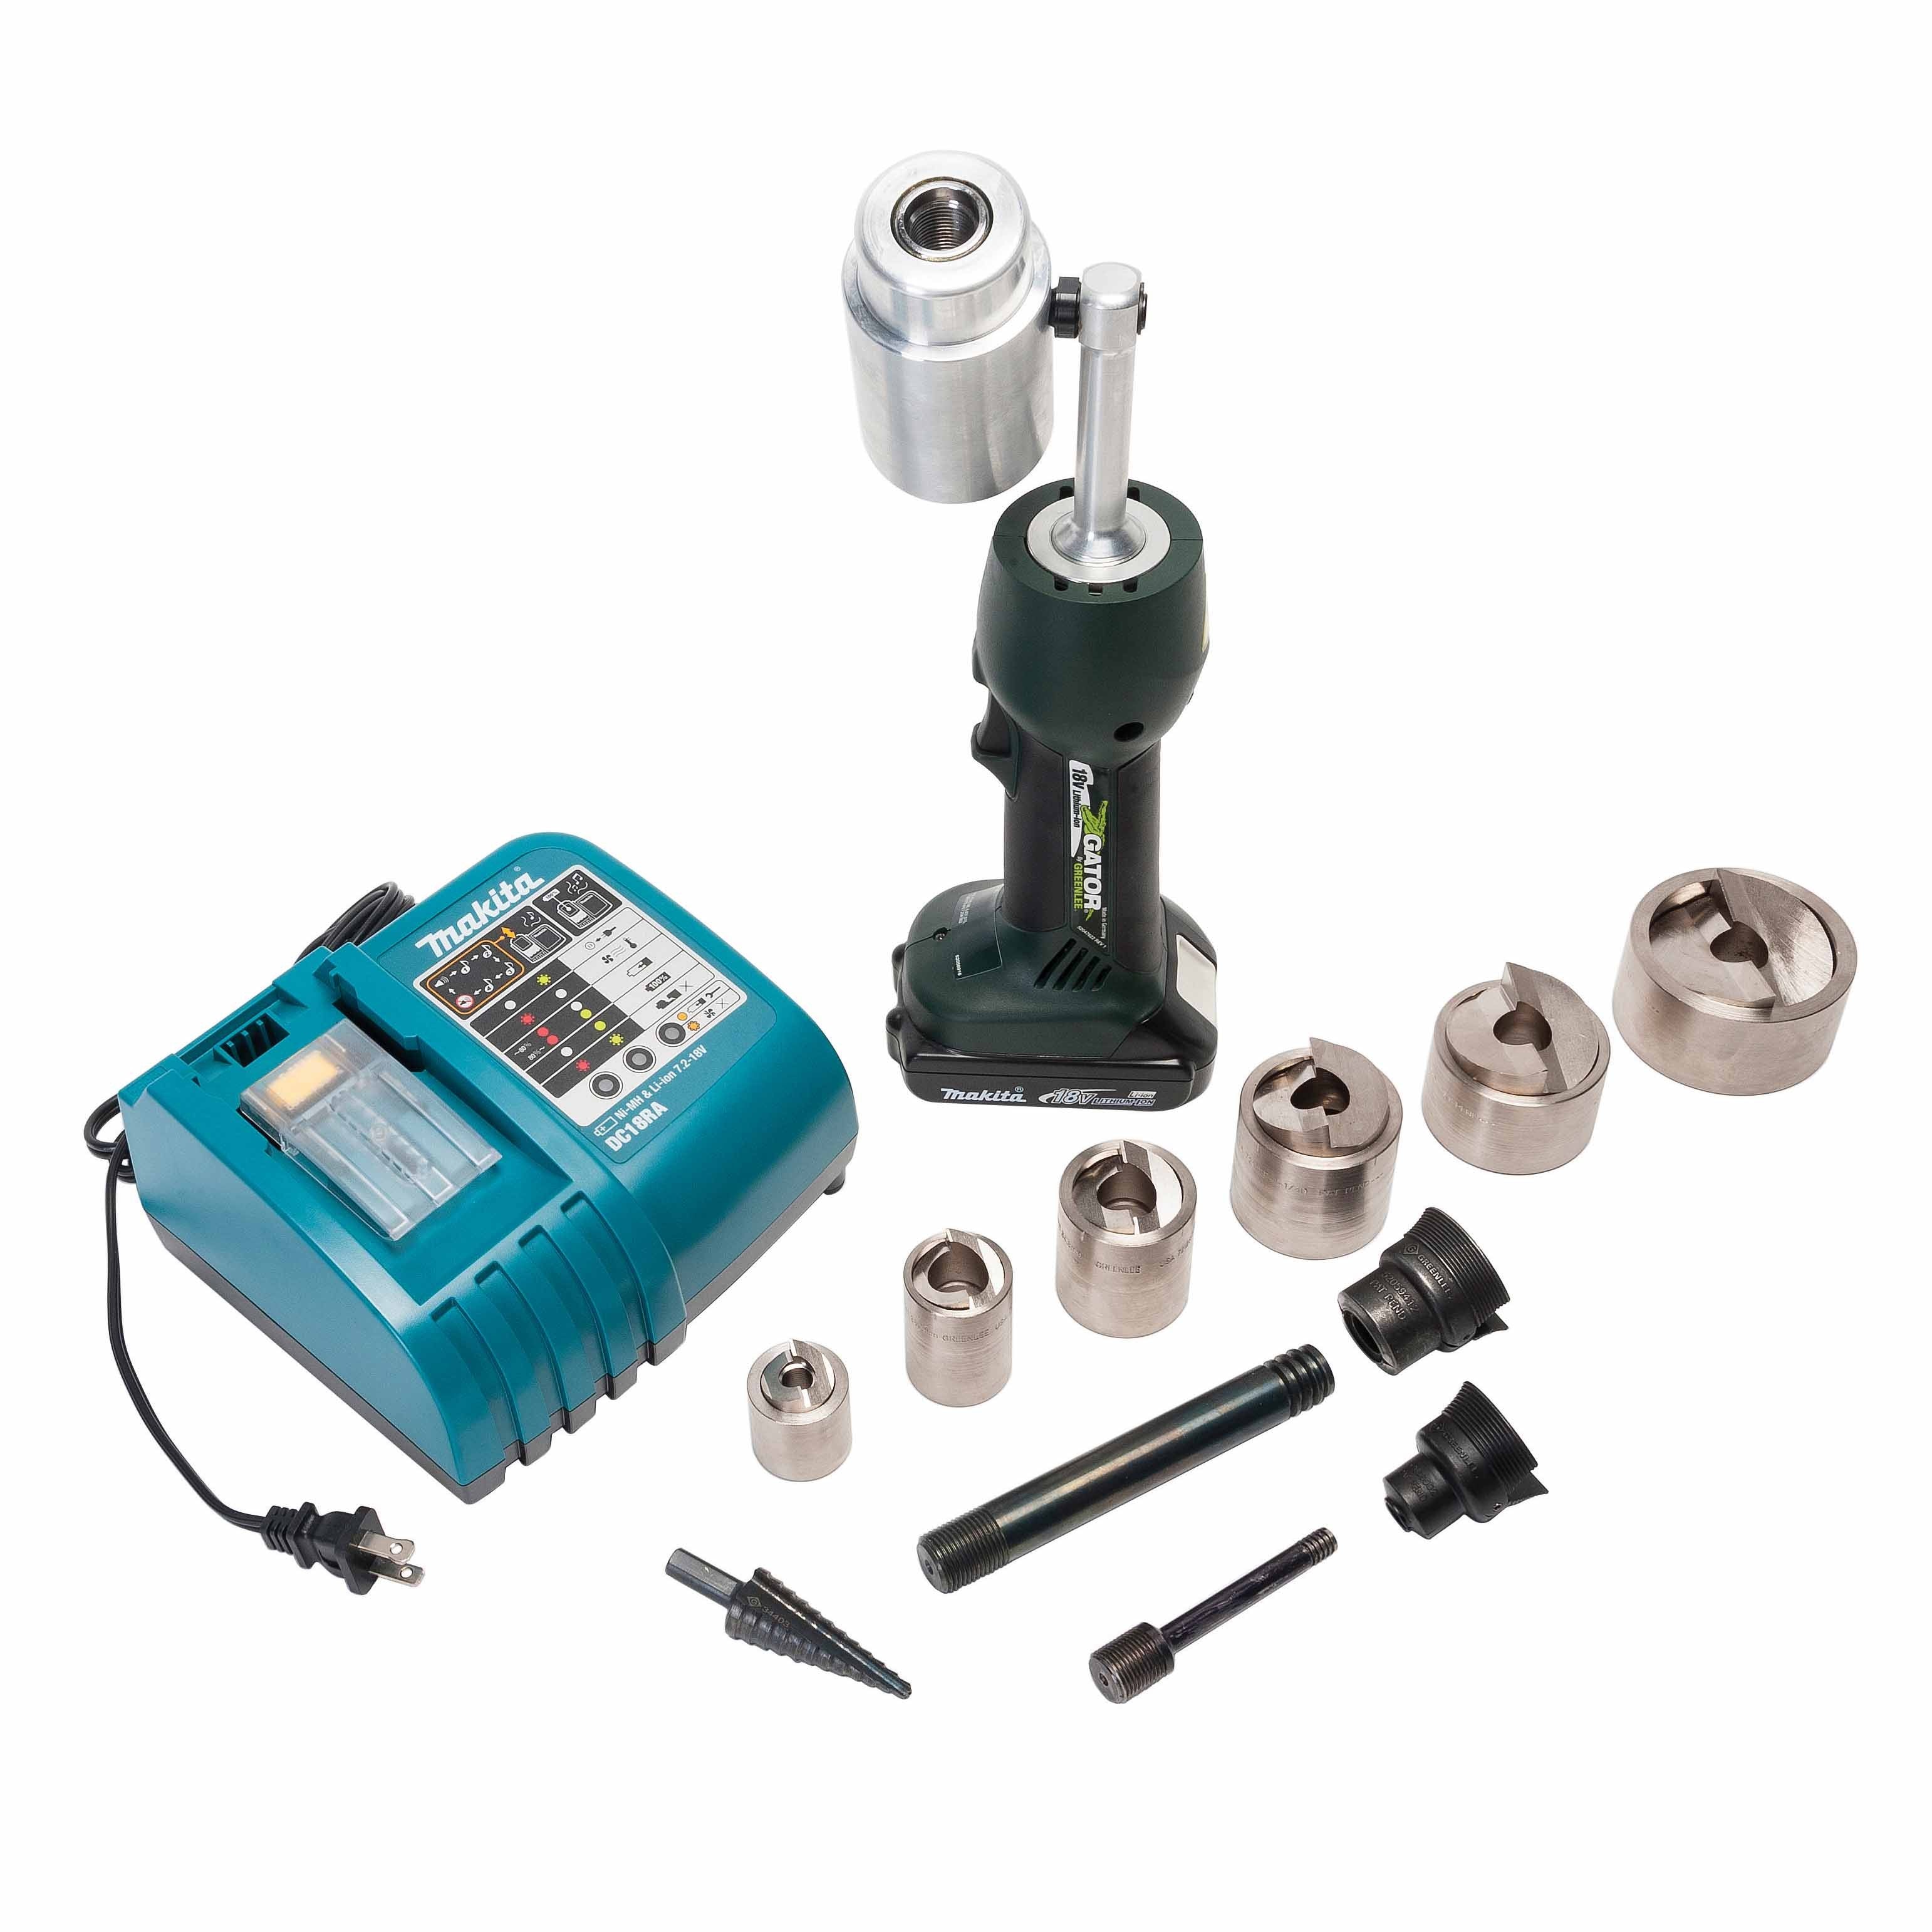 Greenlee LS50L11SBSP SPEED PUNCH Kit with LS50 Battery Driver, 1/2" to 2" Conduit